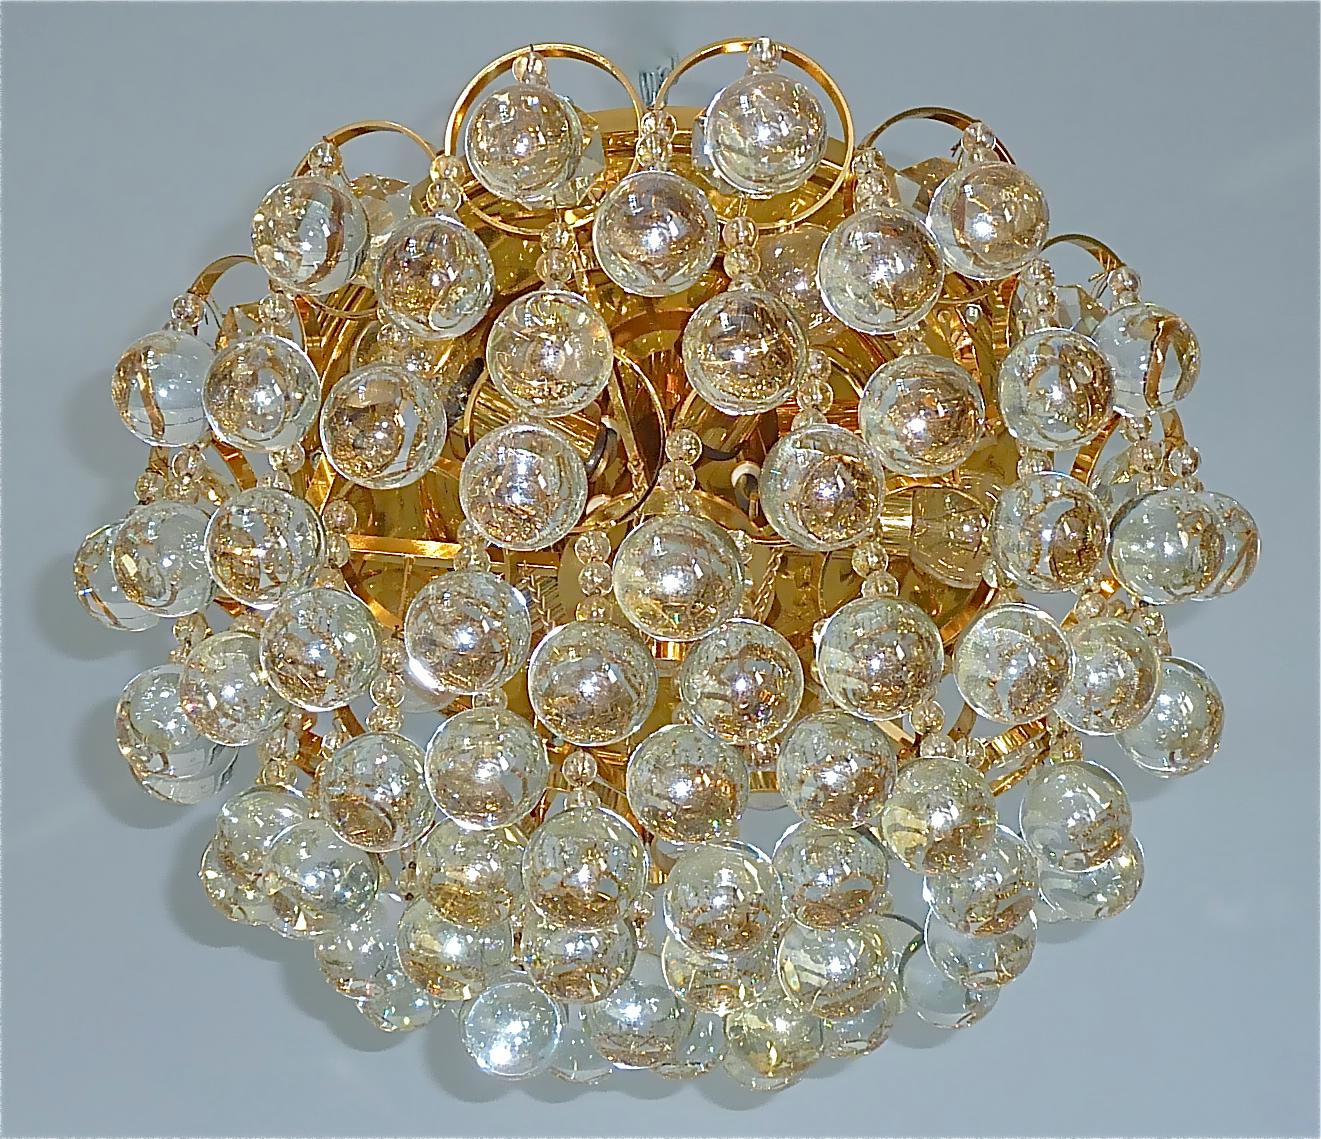 Rare and magnificent gilt brass metal flush mount chandelier by german first class lighting company Palwa, Germany circa 1960-1970. The chandelier has lots of hand-crafted glass pearls and spheres of very faint amber shimmering shiny iridescent